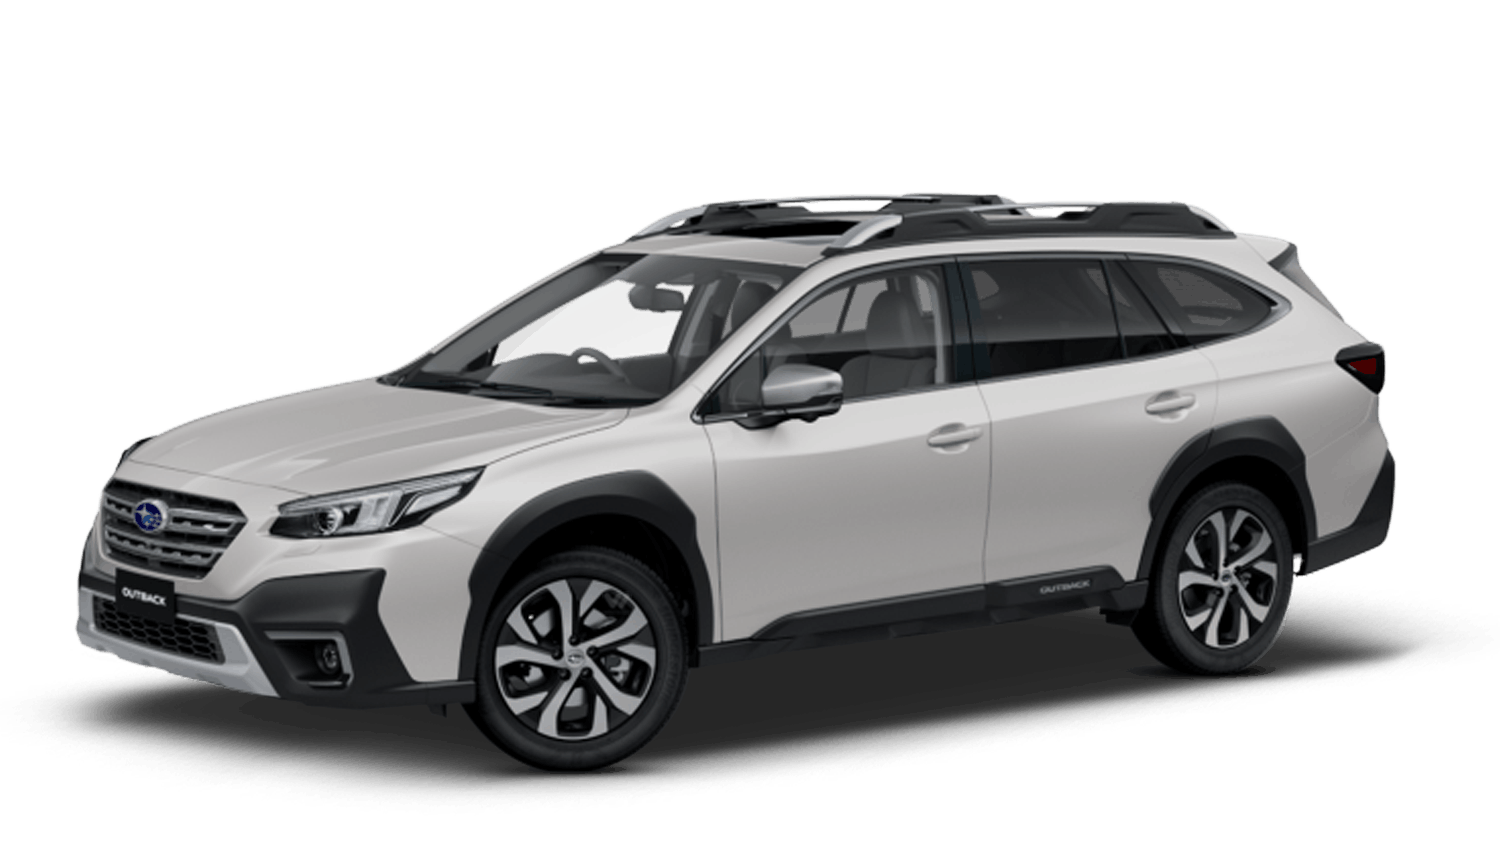 Crystal White Pearl All-New Subaru Outback